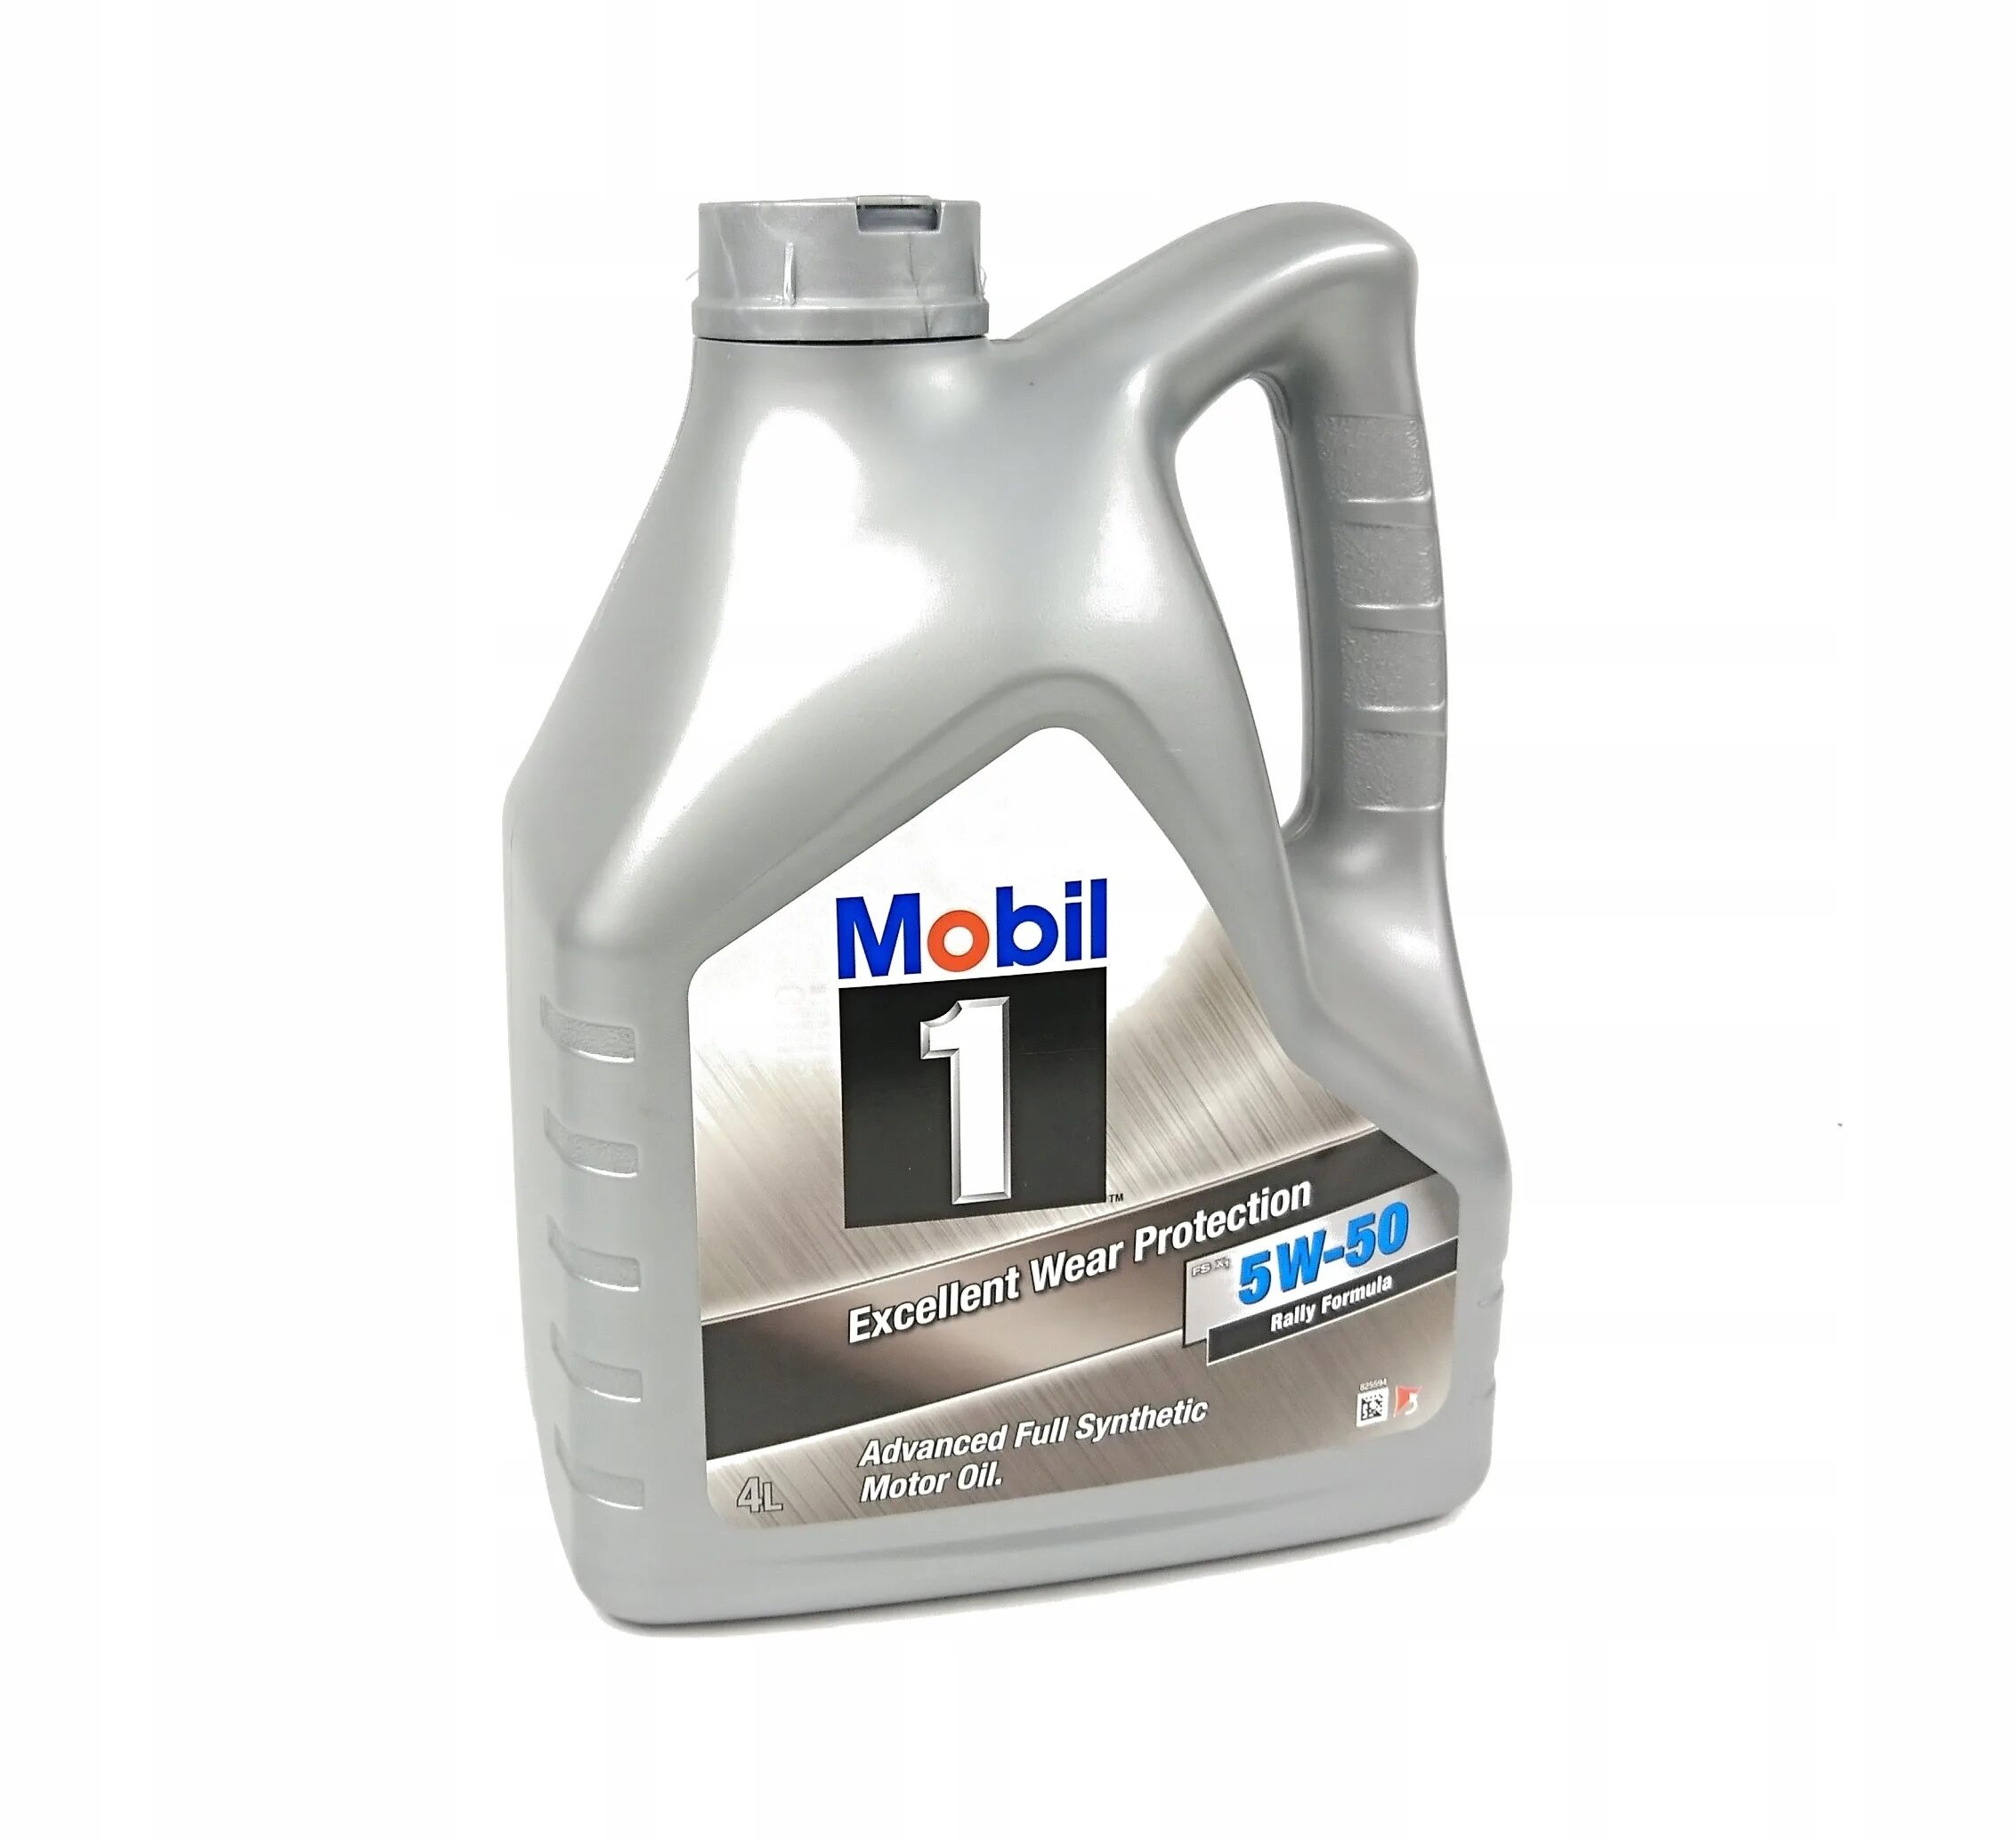 Mobil 1 FS x1 5w-50 4л. 153631 Mobil 1 5w50. Mobil 1™ ESP 5 W 50. Mobil 5w50 Peak Life. Моторное масло mobil 1 x1